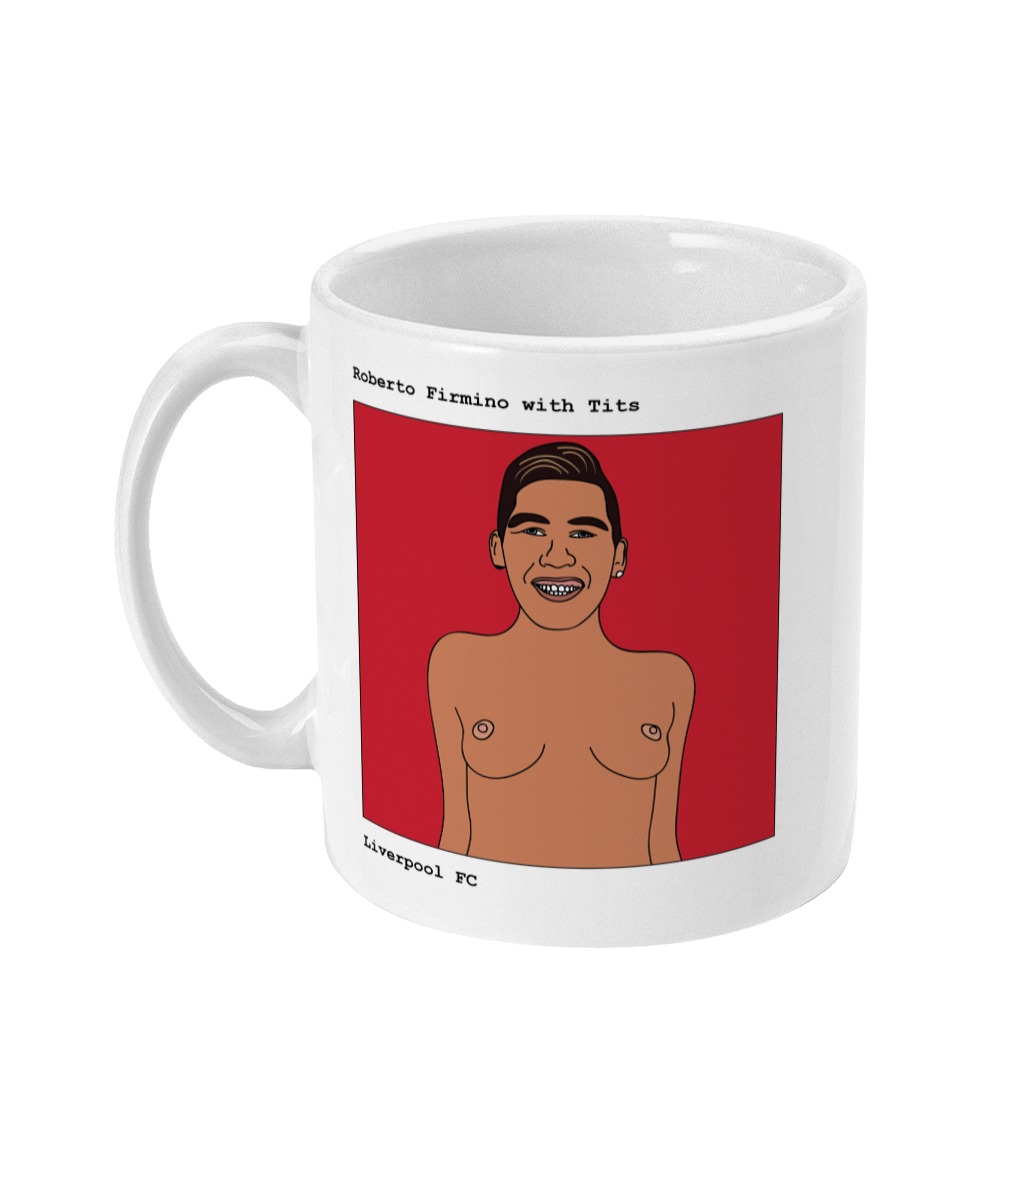 Roberto Firmino with Tits - Footballers with Tits